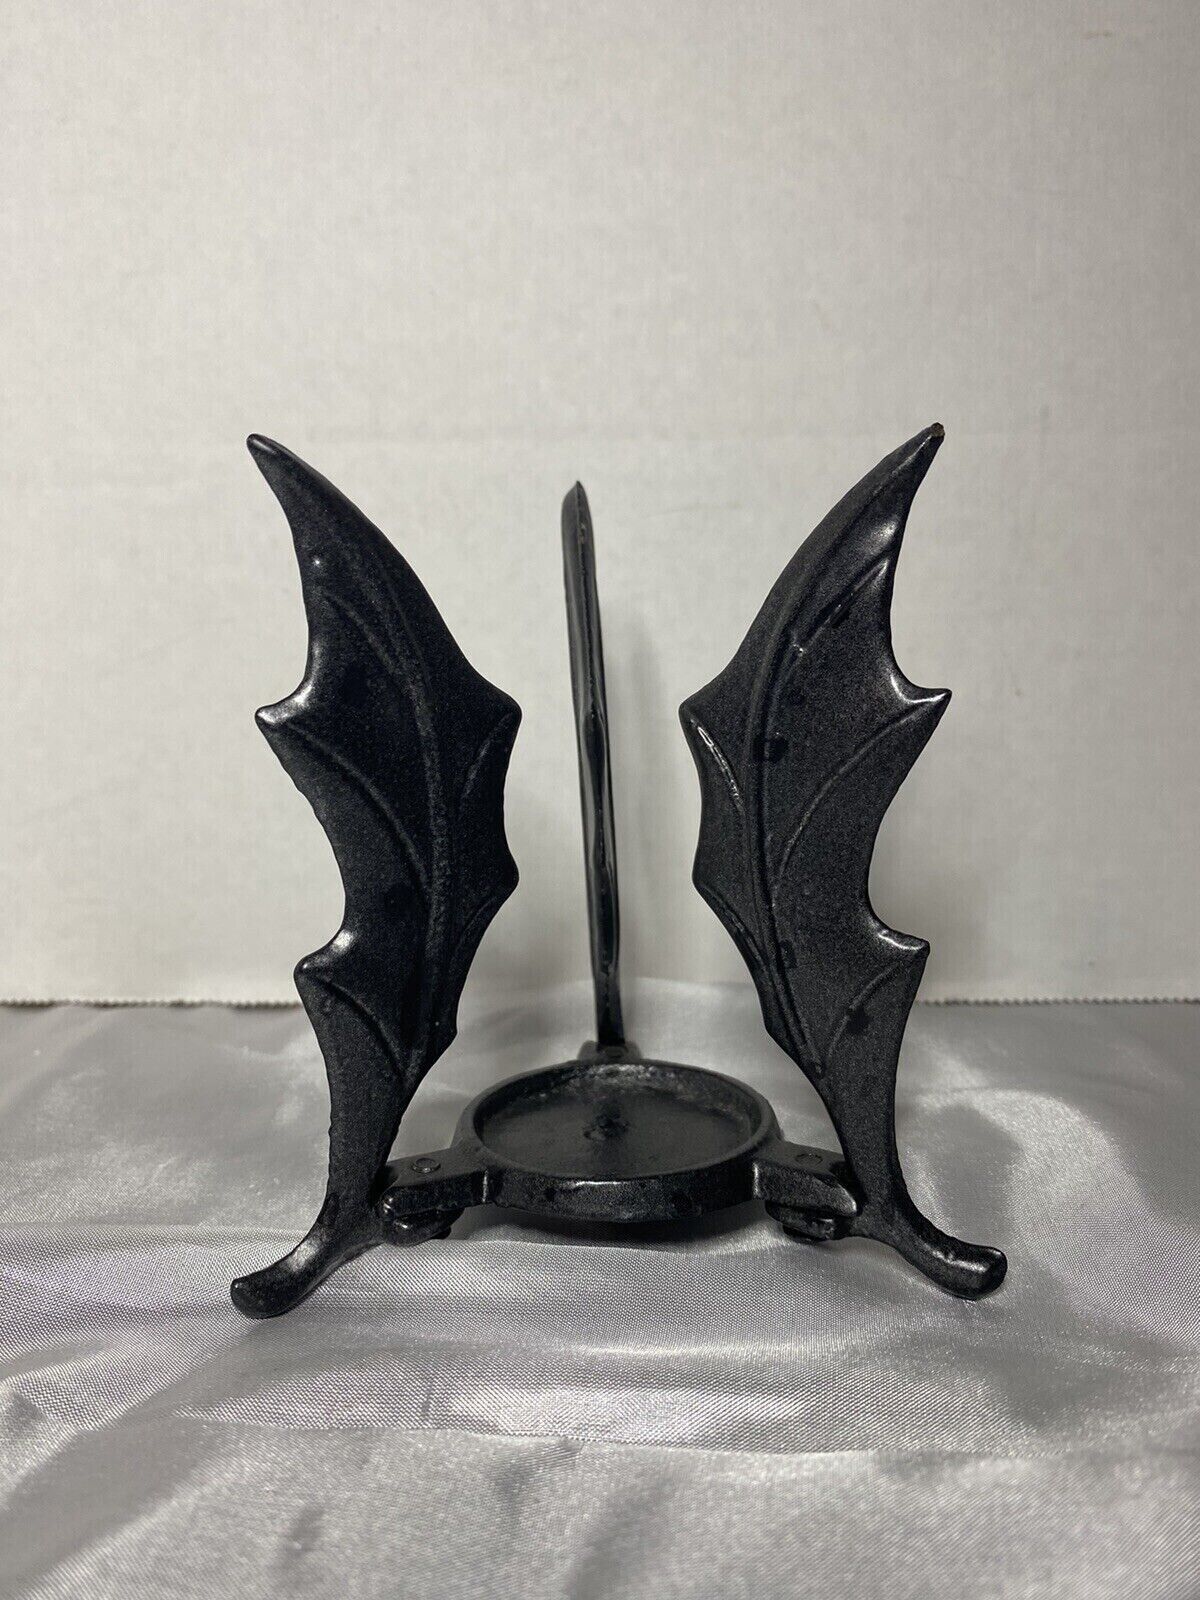 Cast Iron Holly Leaf Candle Holder - $14.95